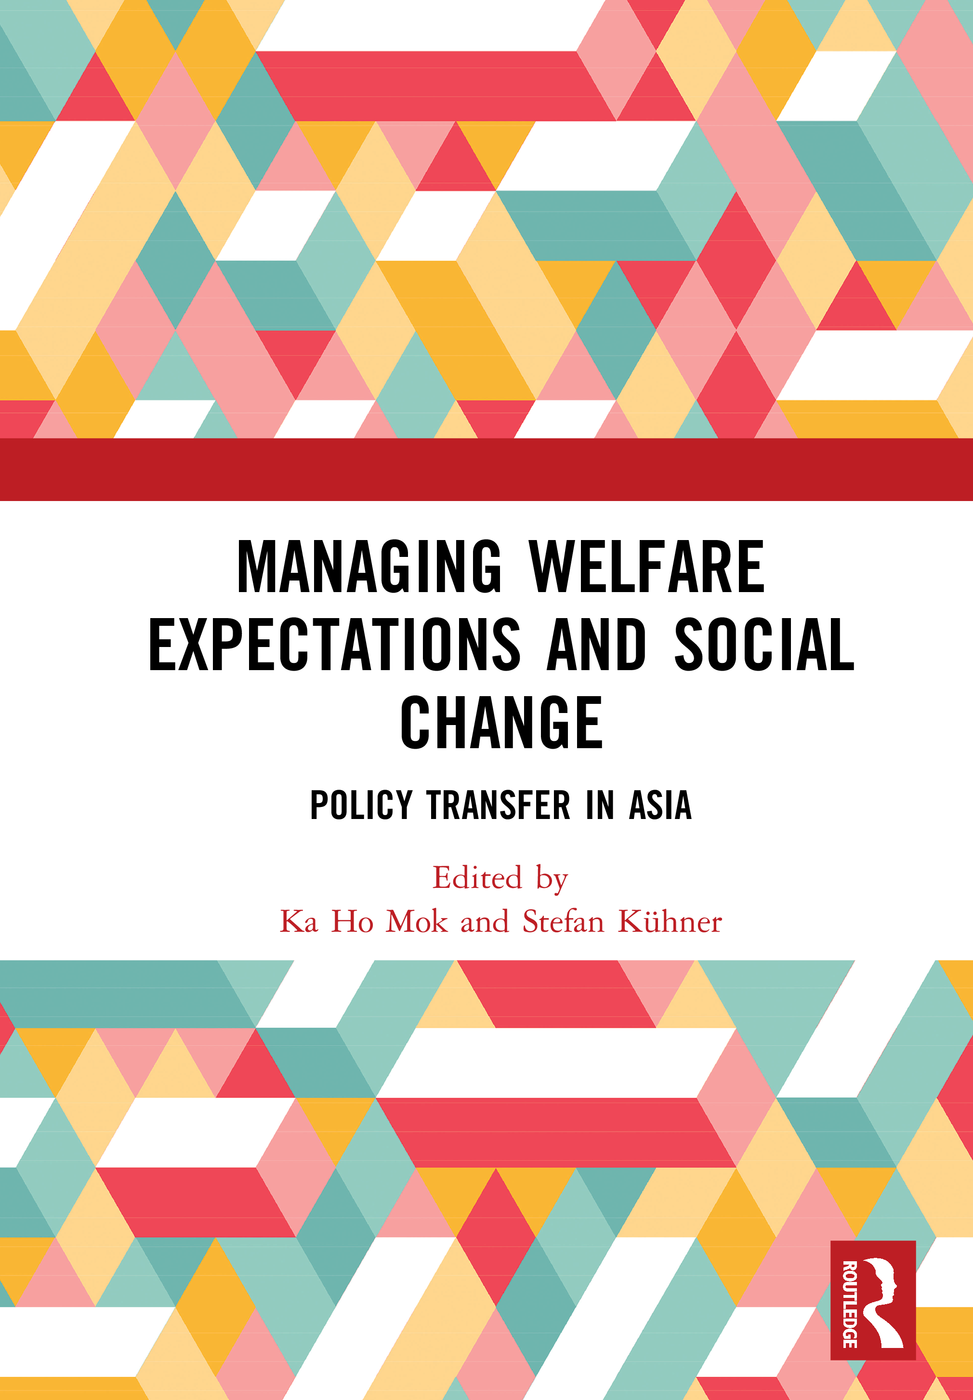 Managing Welfare Expectations and Social Change Policy Transfer in Asia